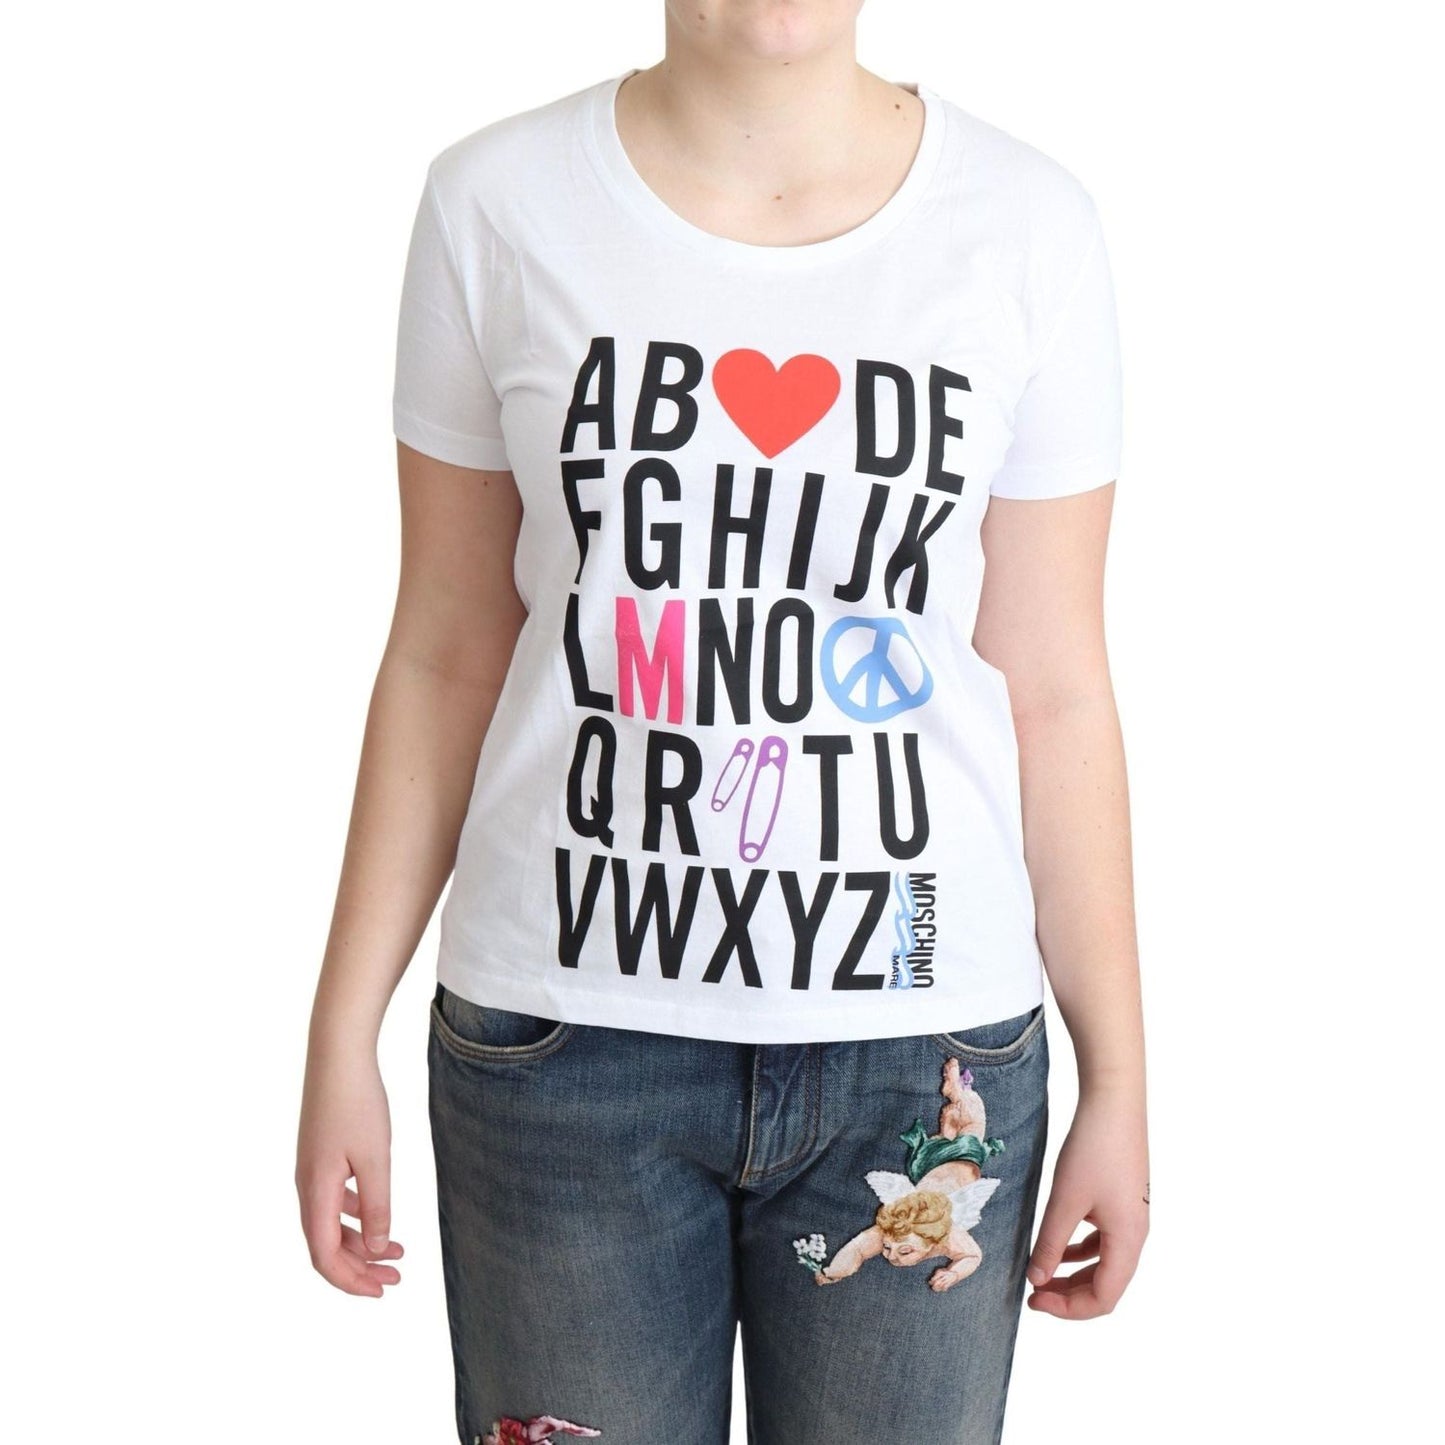 Moschino White Cotton Alphabet Letter Print Tops T-shirt white-cotton-alphabet-letter-print-tops-t-shirt IMG_0934-1-scaled-54a63d34-ff2.jpg